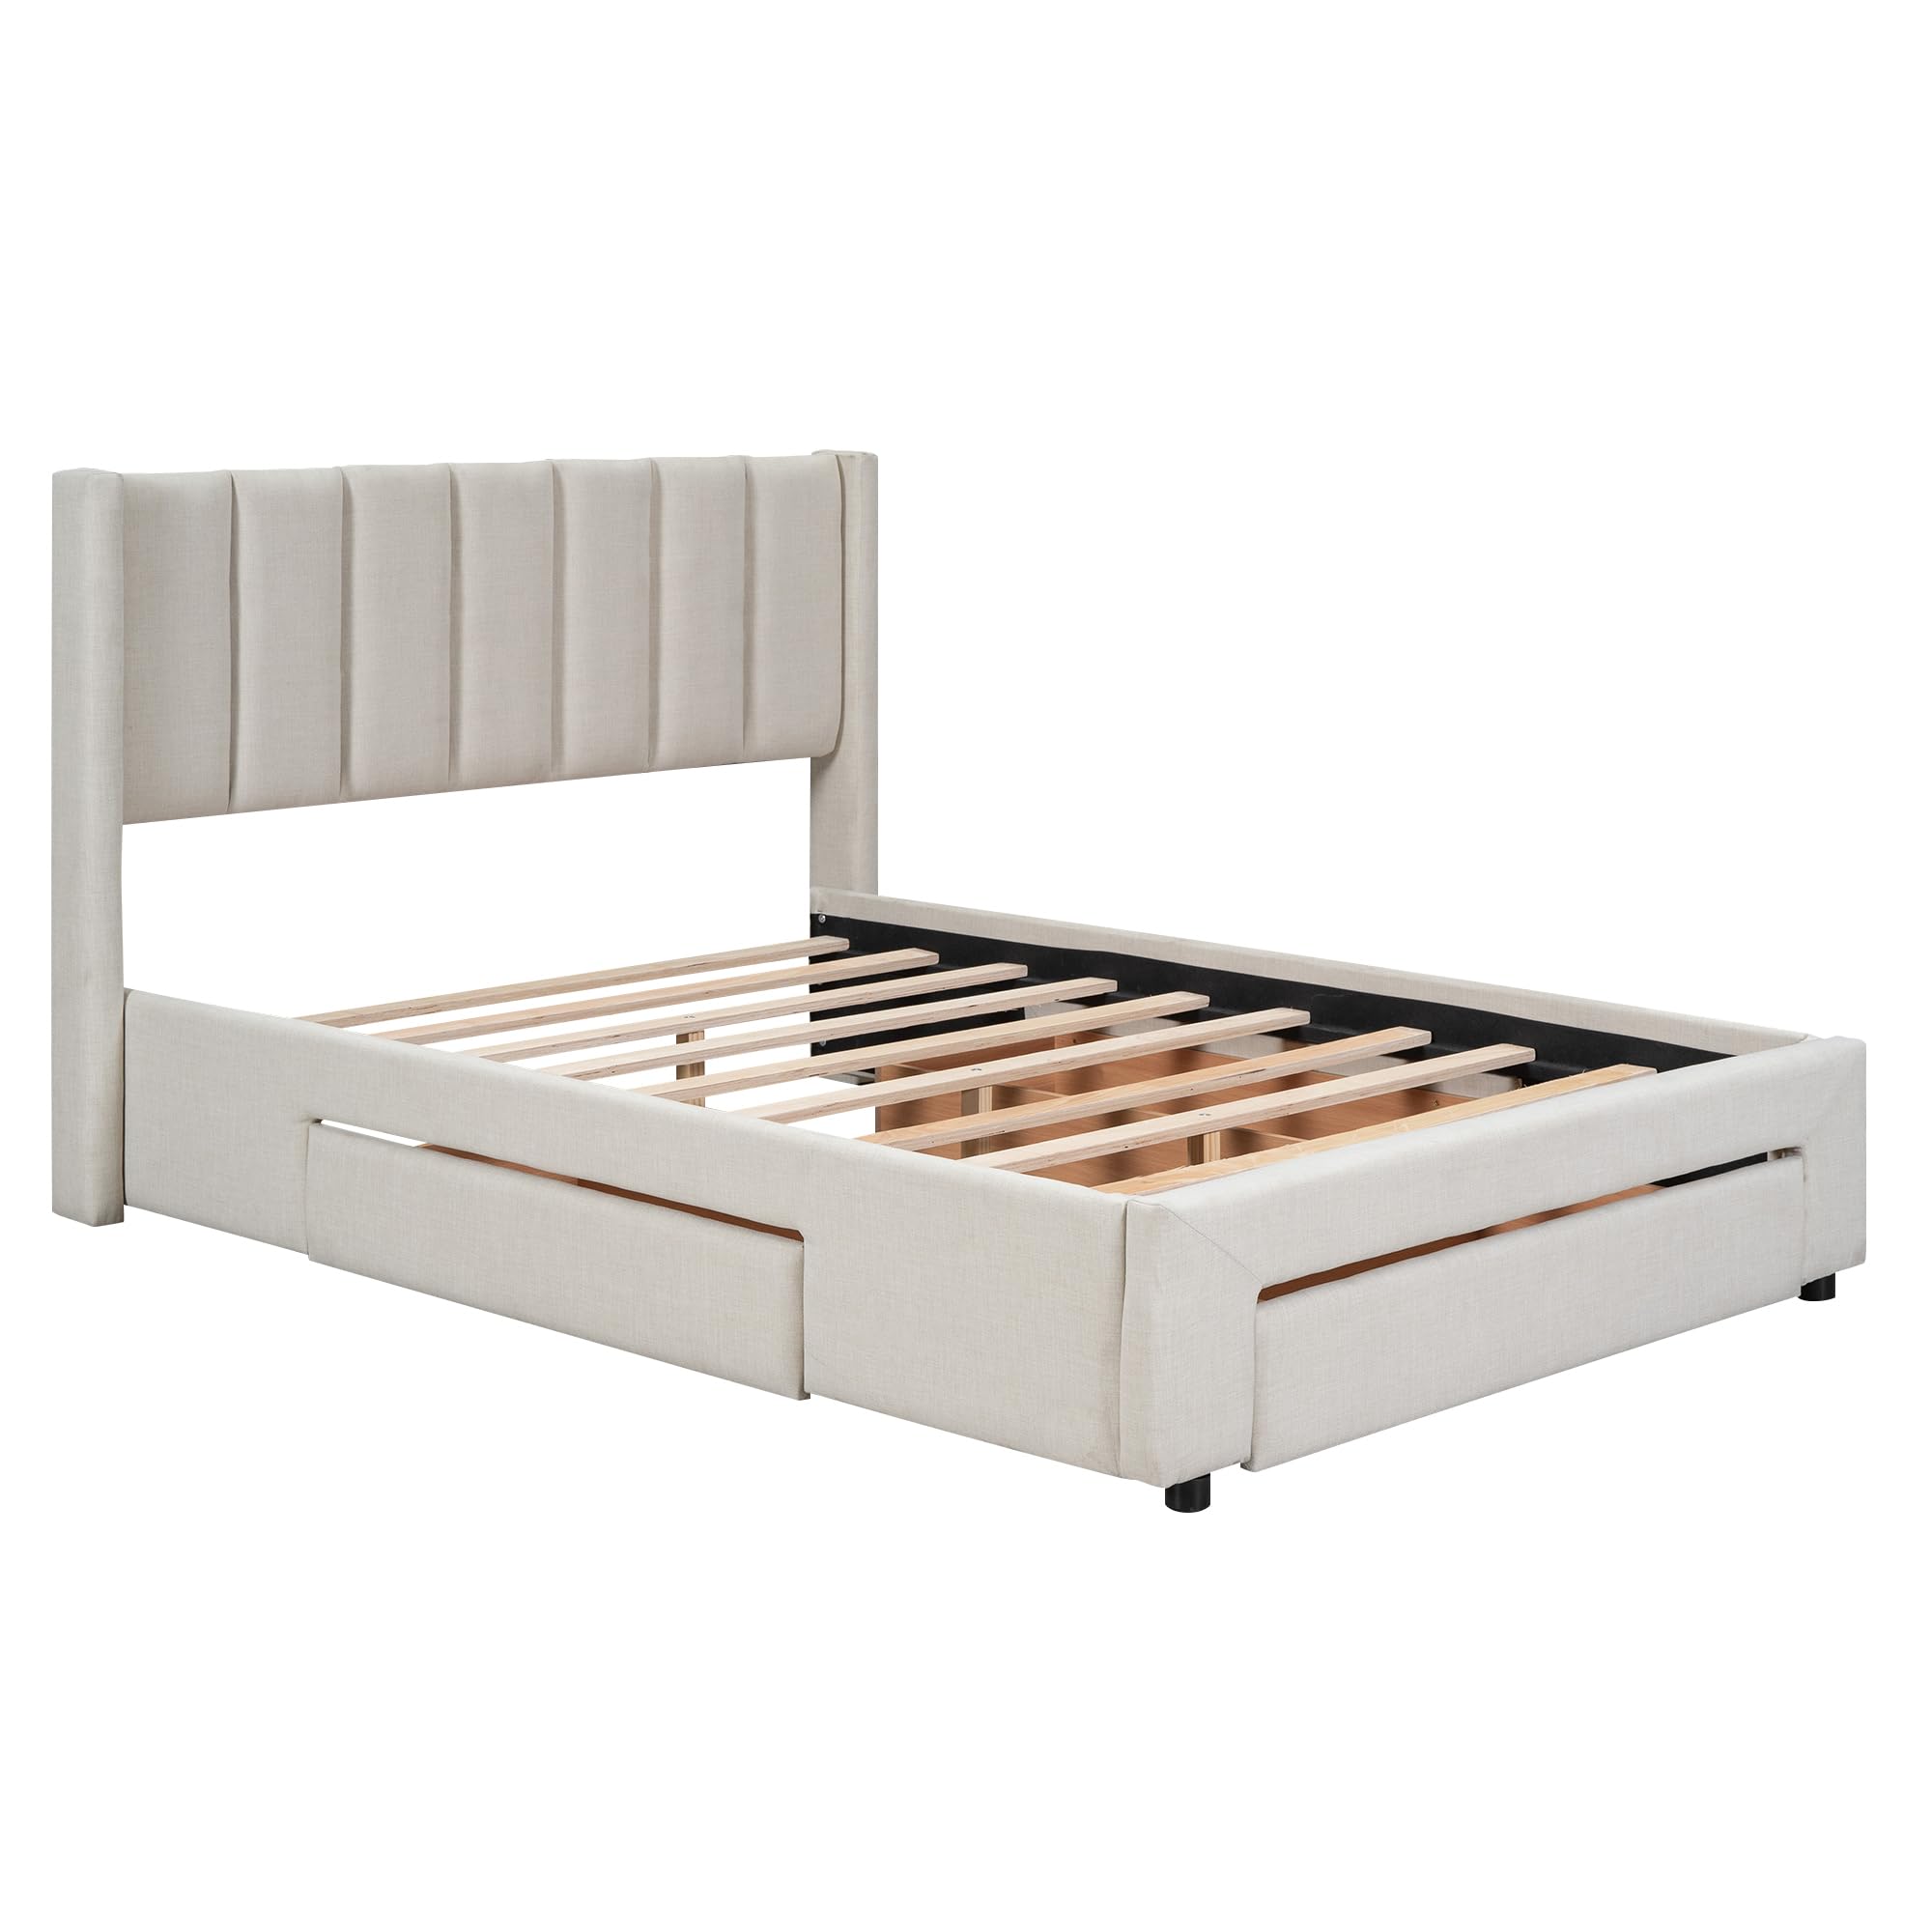 Morhome Upholstered Queen Size Platform Bed Frame with 3 Storage Drawers and Headboard, Button Tufted Mattress Foundation Wooden Slats Support, No Box Spring Needed